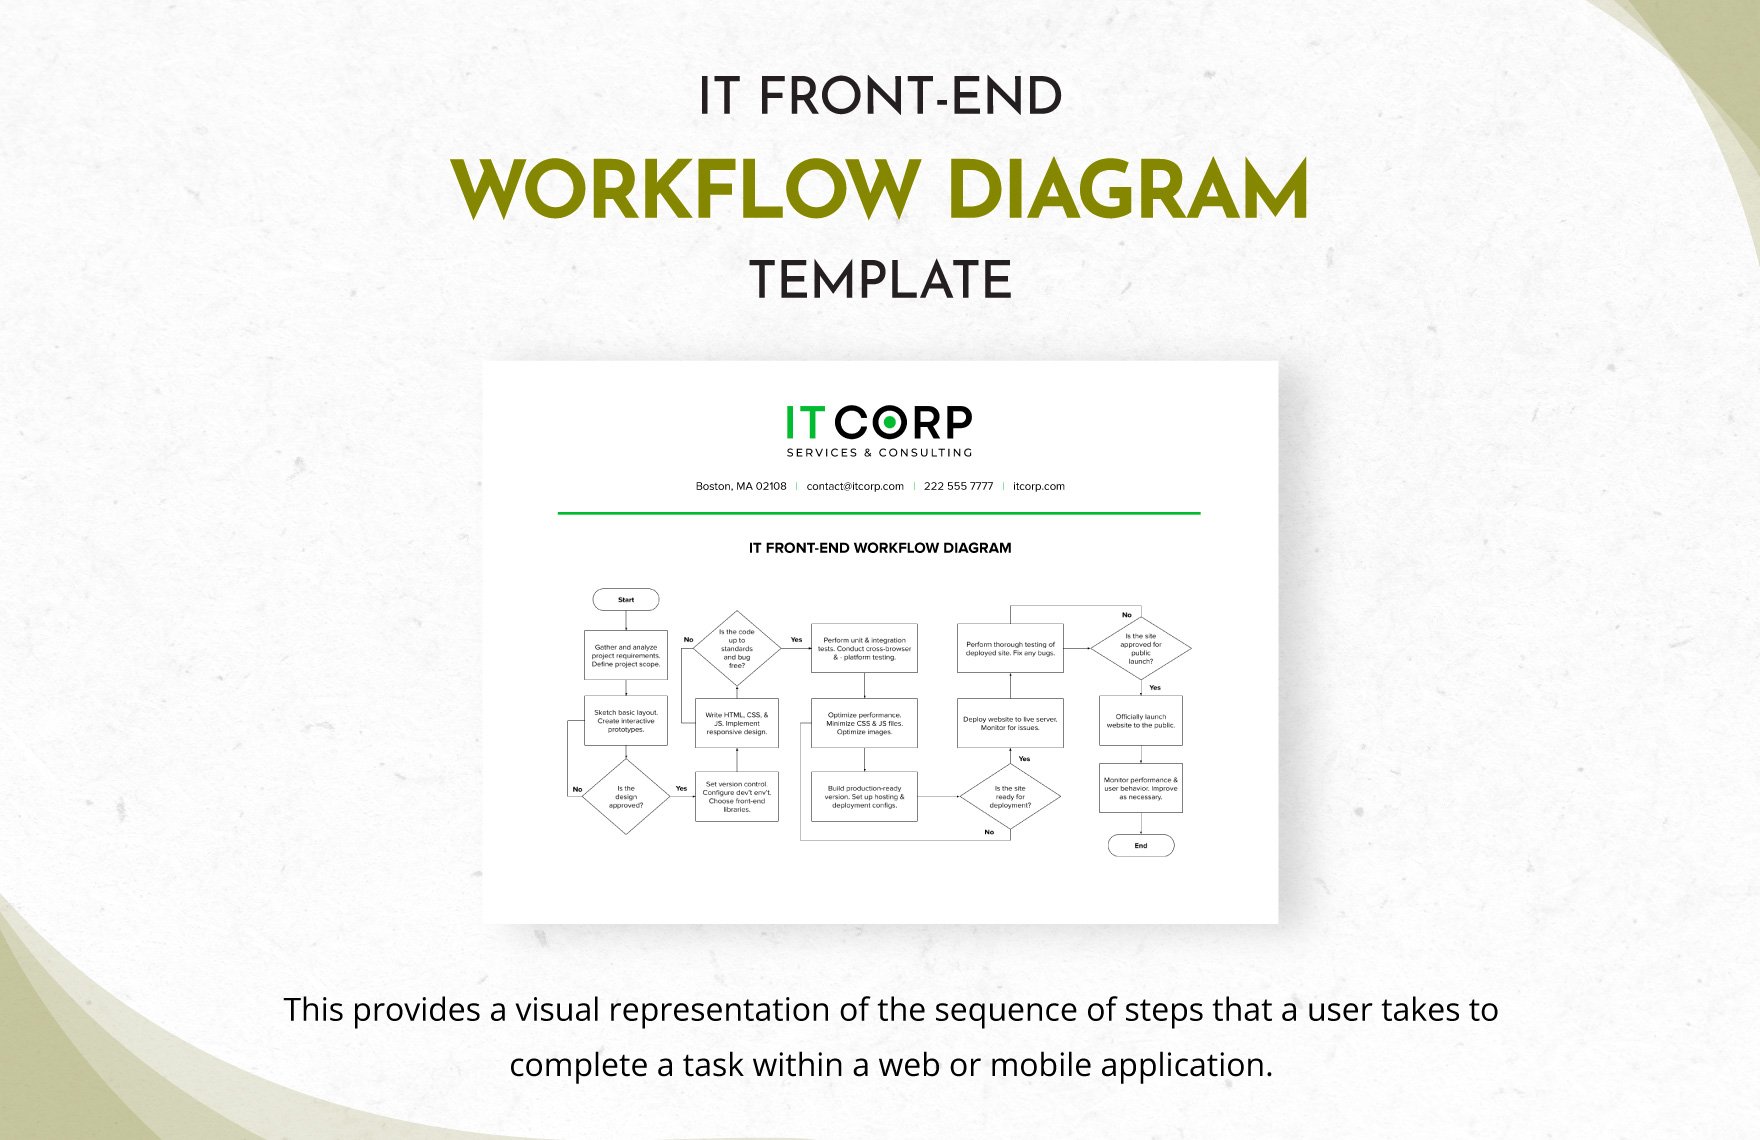 IT Front-End Workflow Diagram Template